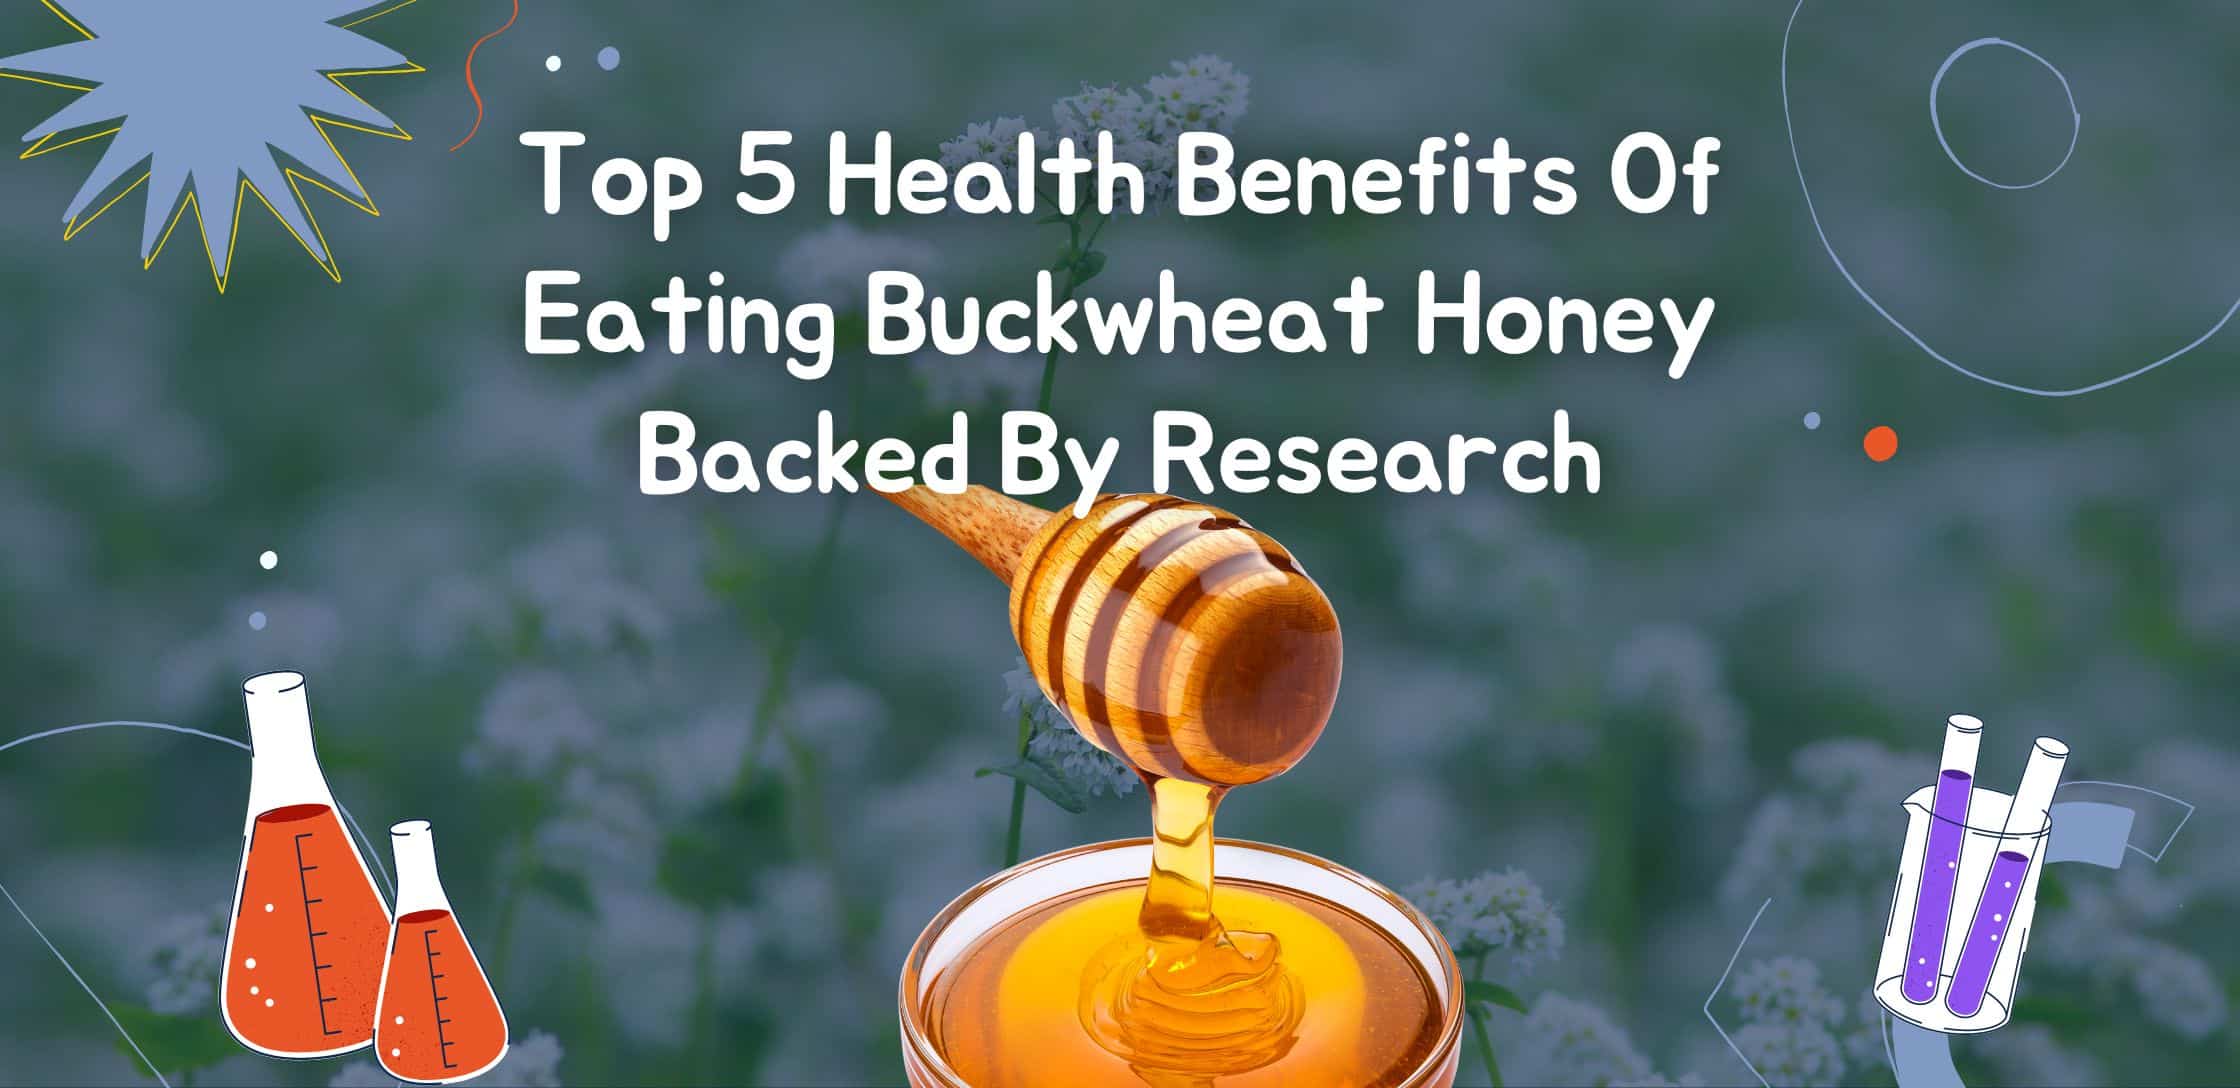 Top 5 Health Benefits Of Eating Buckwheat Honey Backed By Research